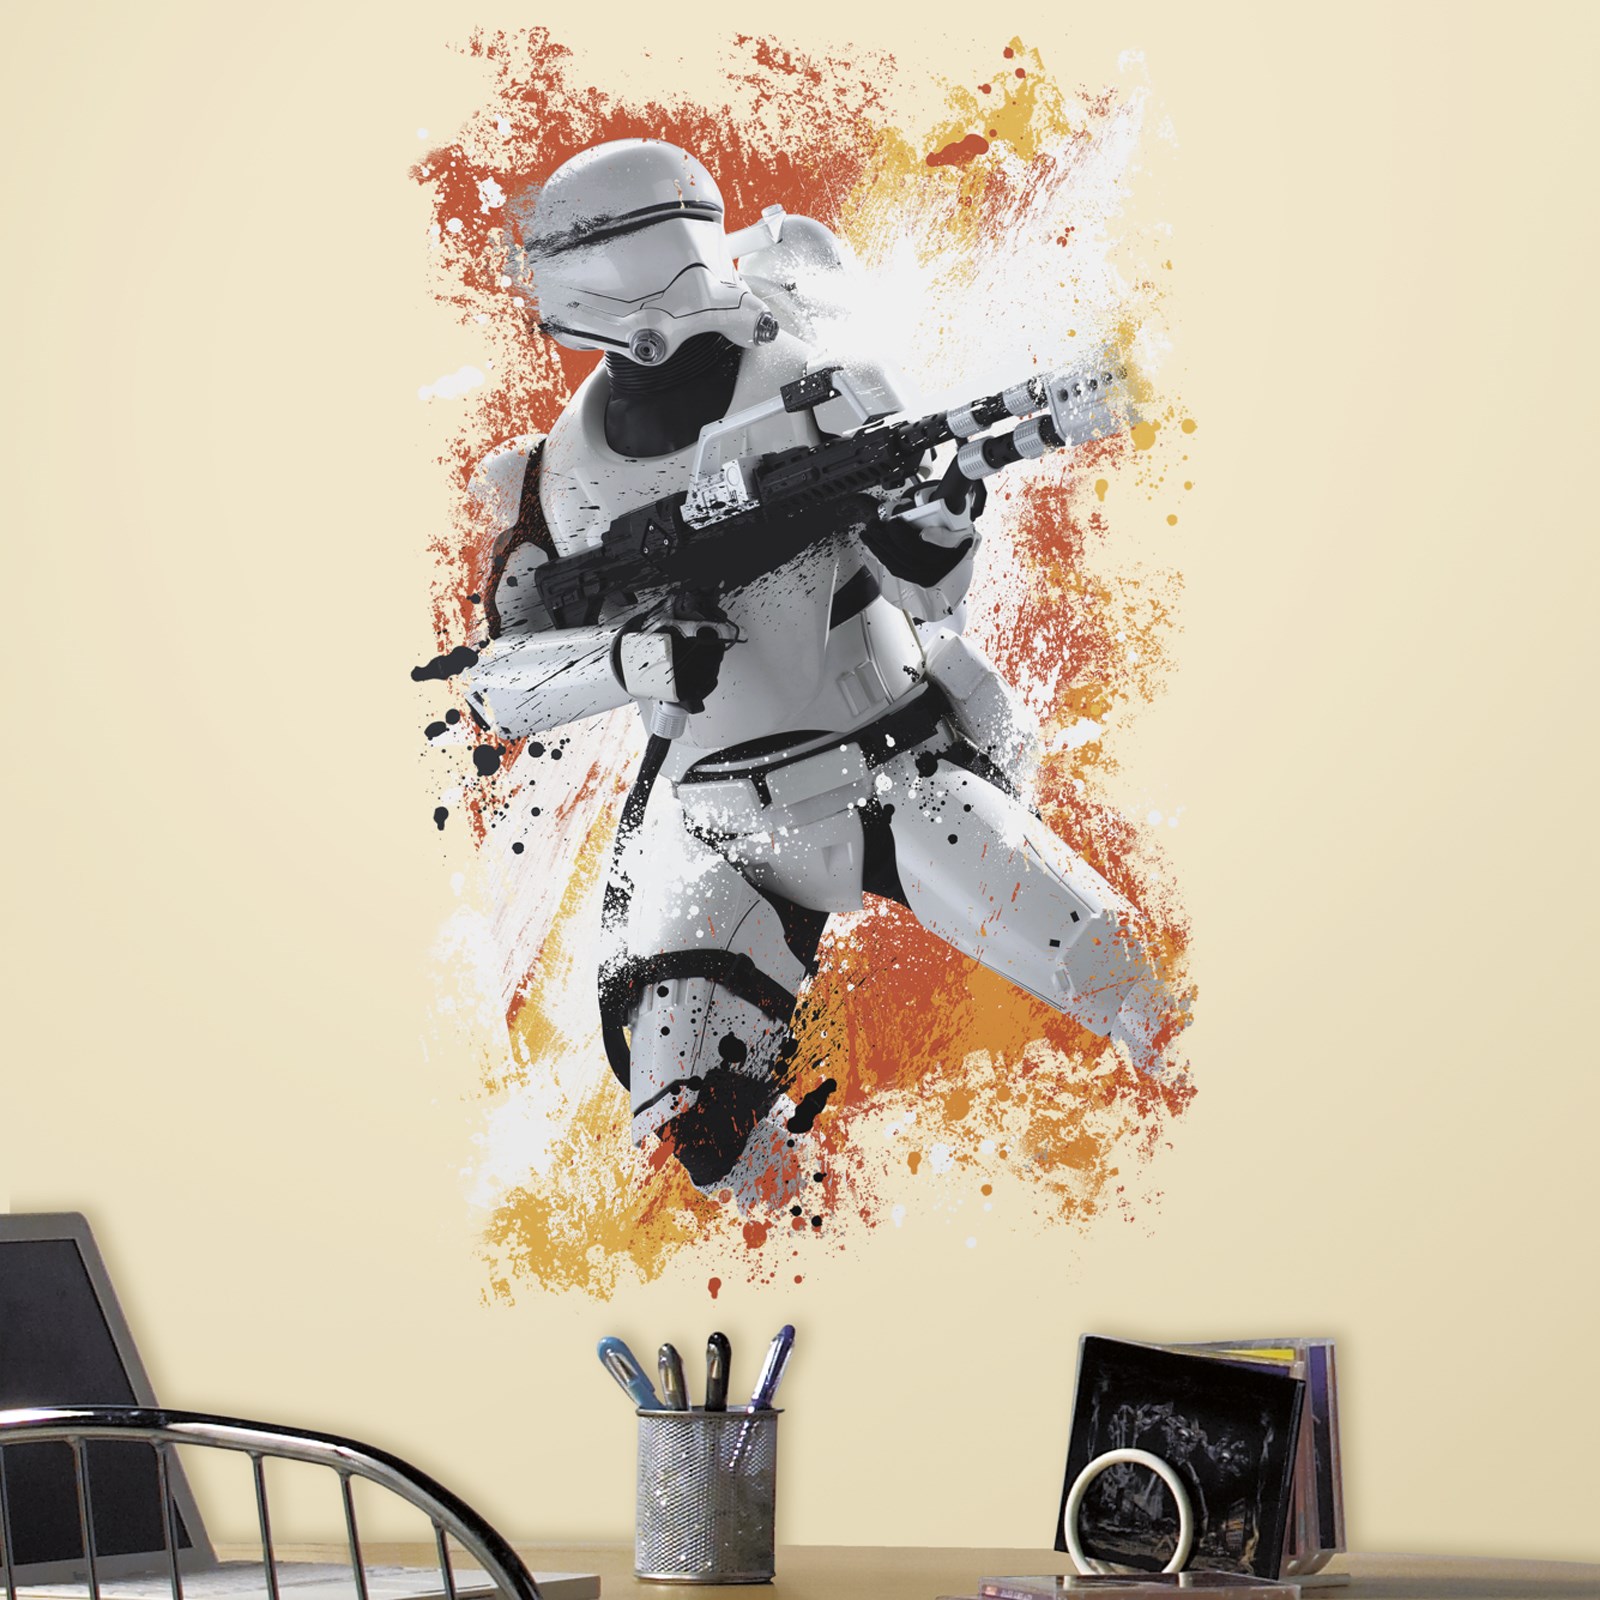 Star Wars 7 The Force Awakens Flametrooper Peel and Stick Wall Decal